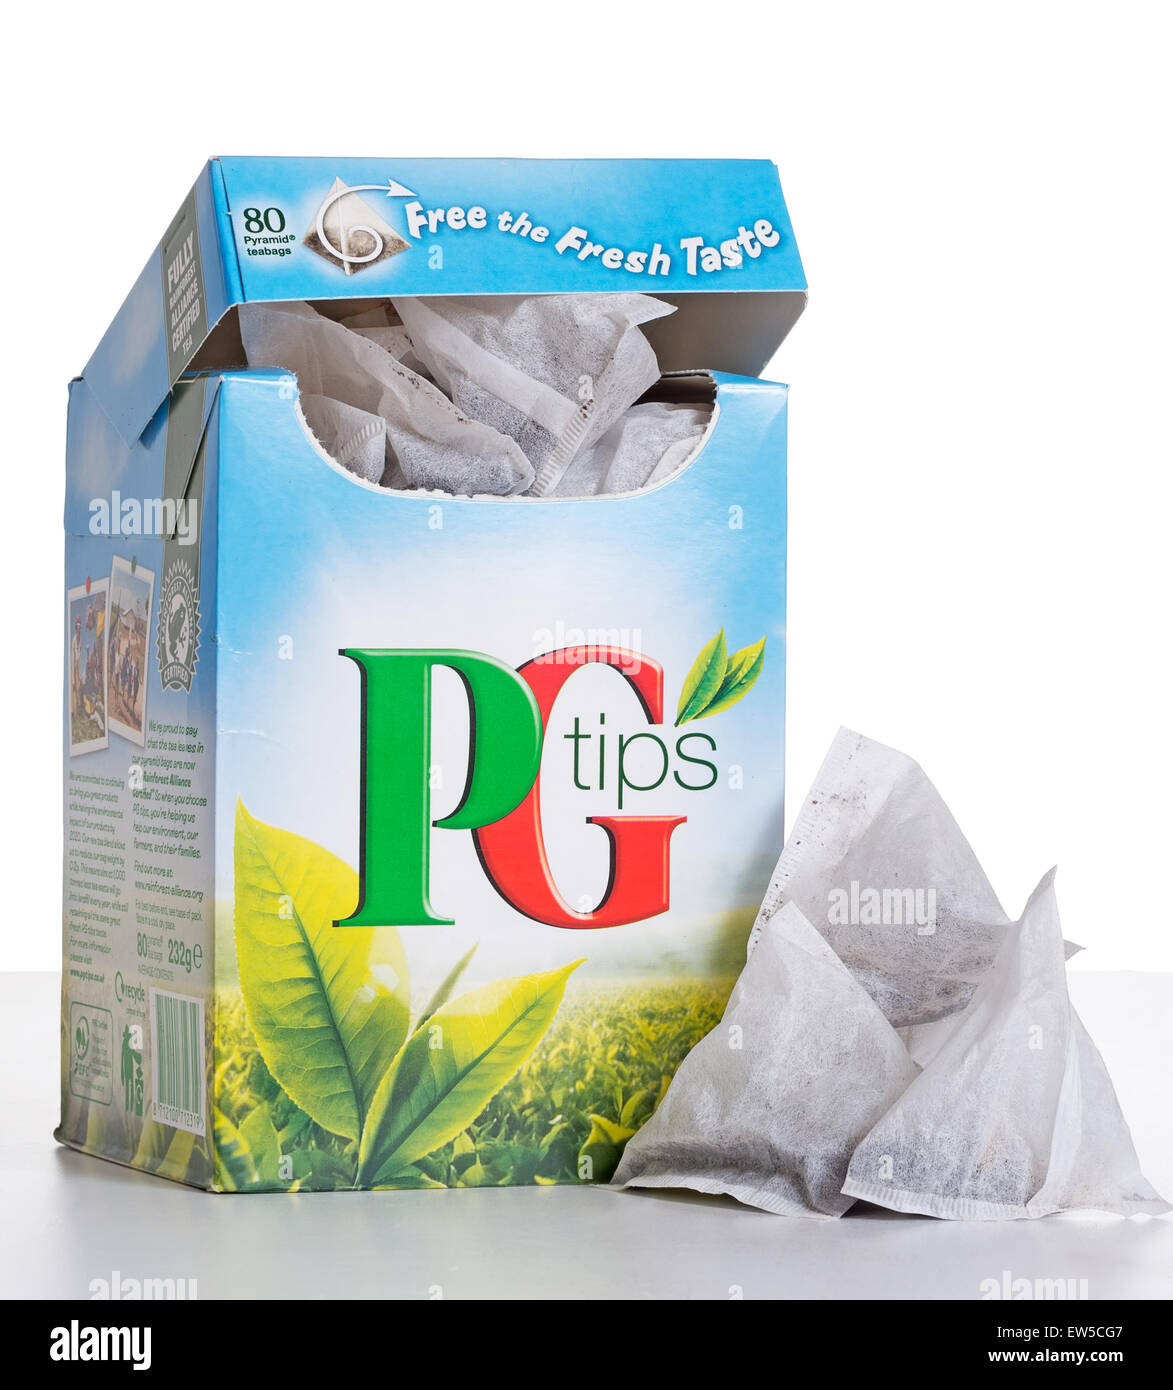  PG Tips Black Tea, Pyramid Tea Bags, 80Count Boxes (Pack of 4)  : Grocery & Gourmet Food